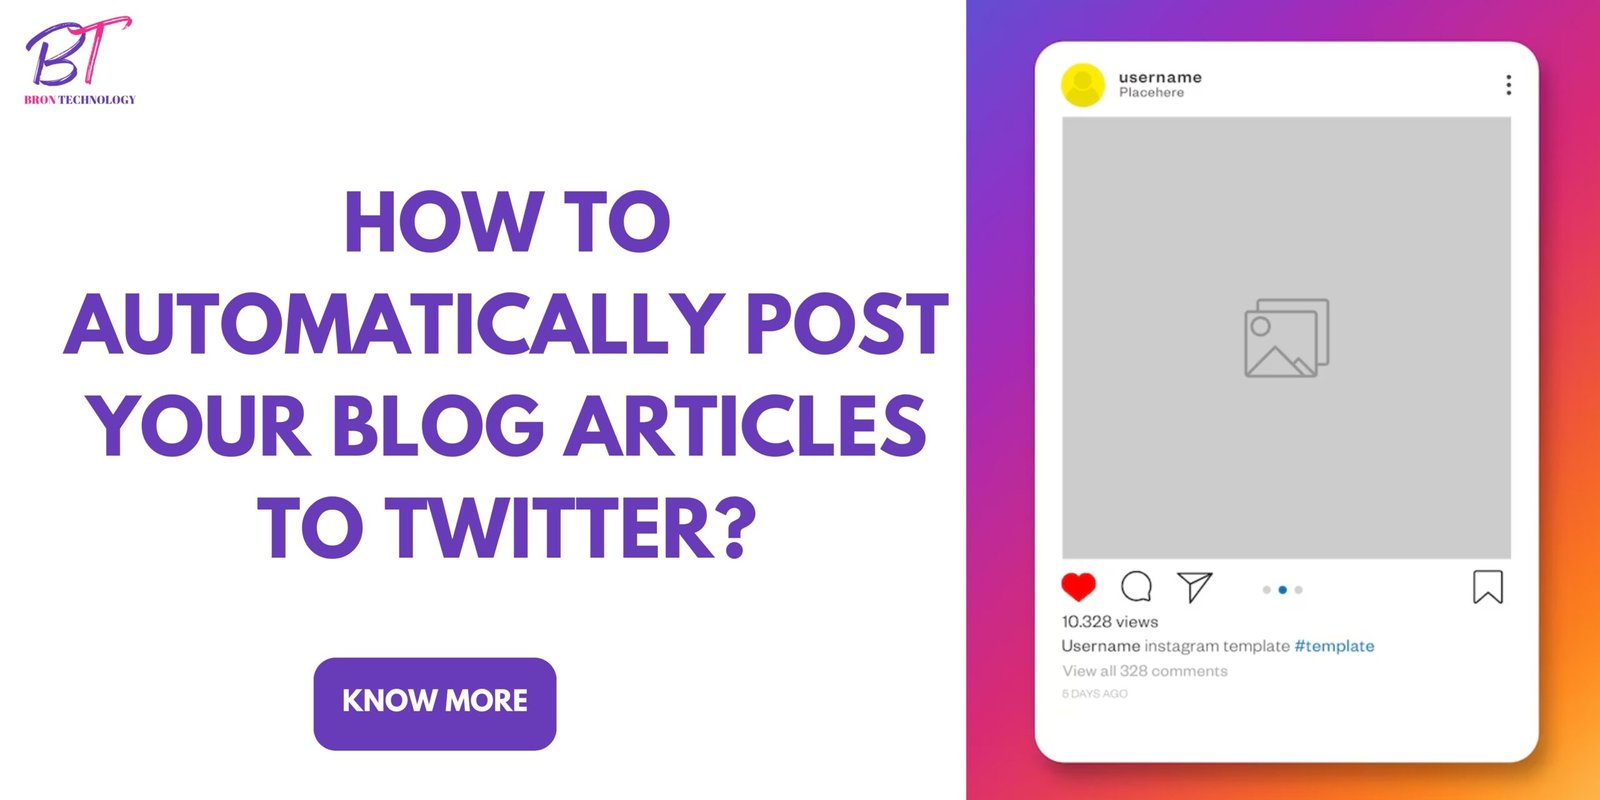 How to Automatically Post Your Blog Articles to Twitter